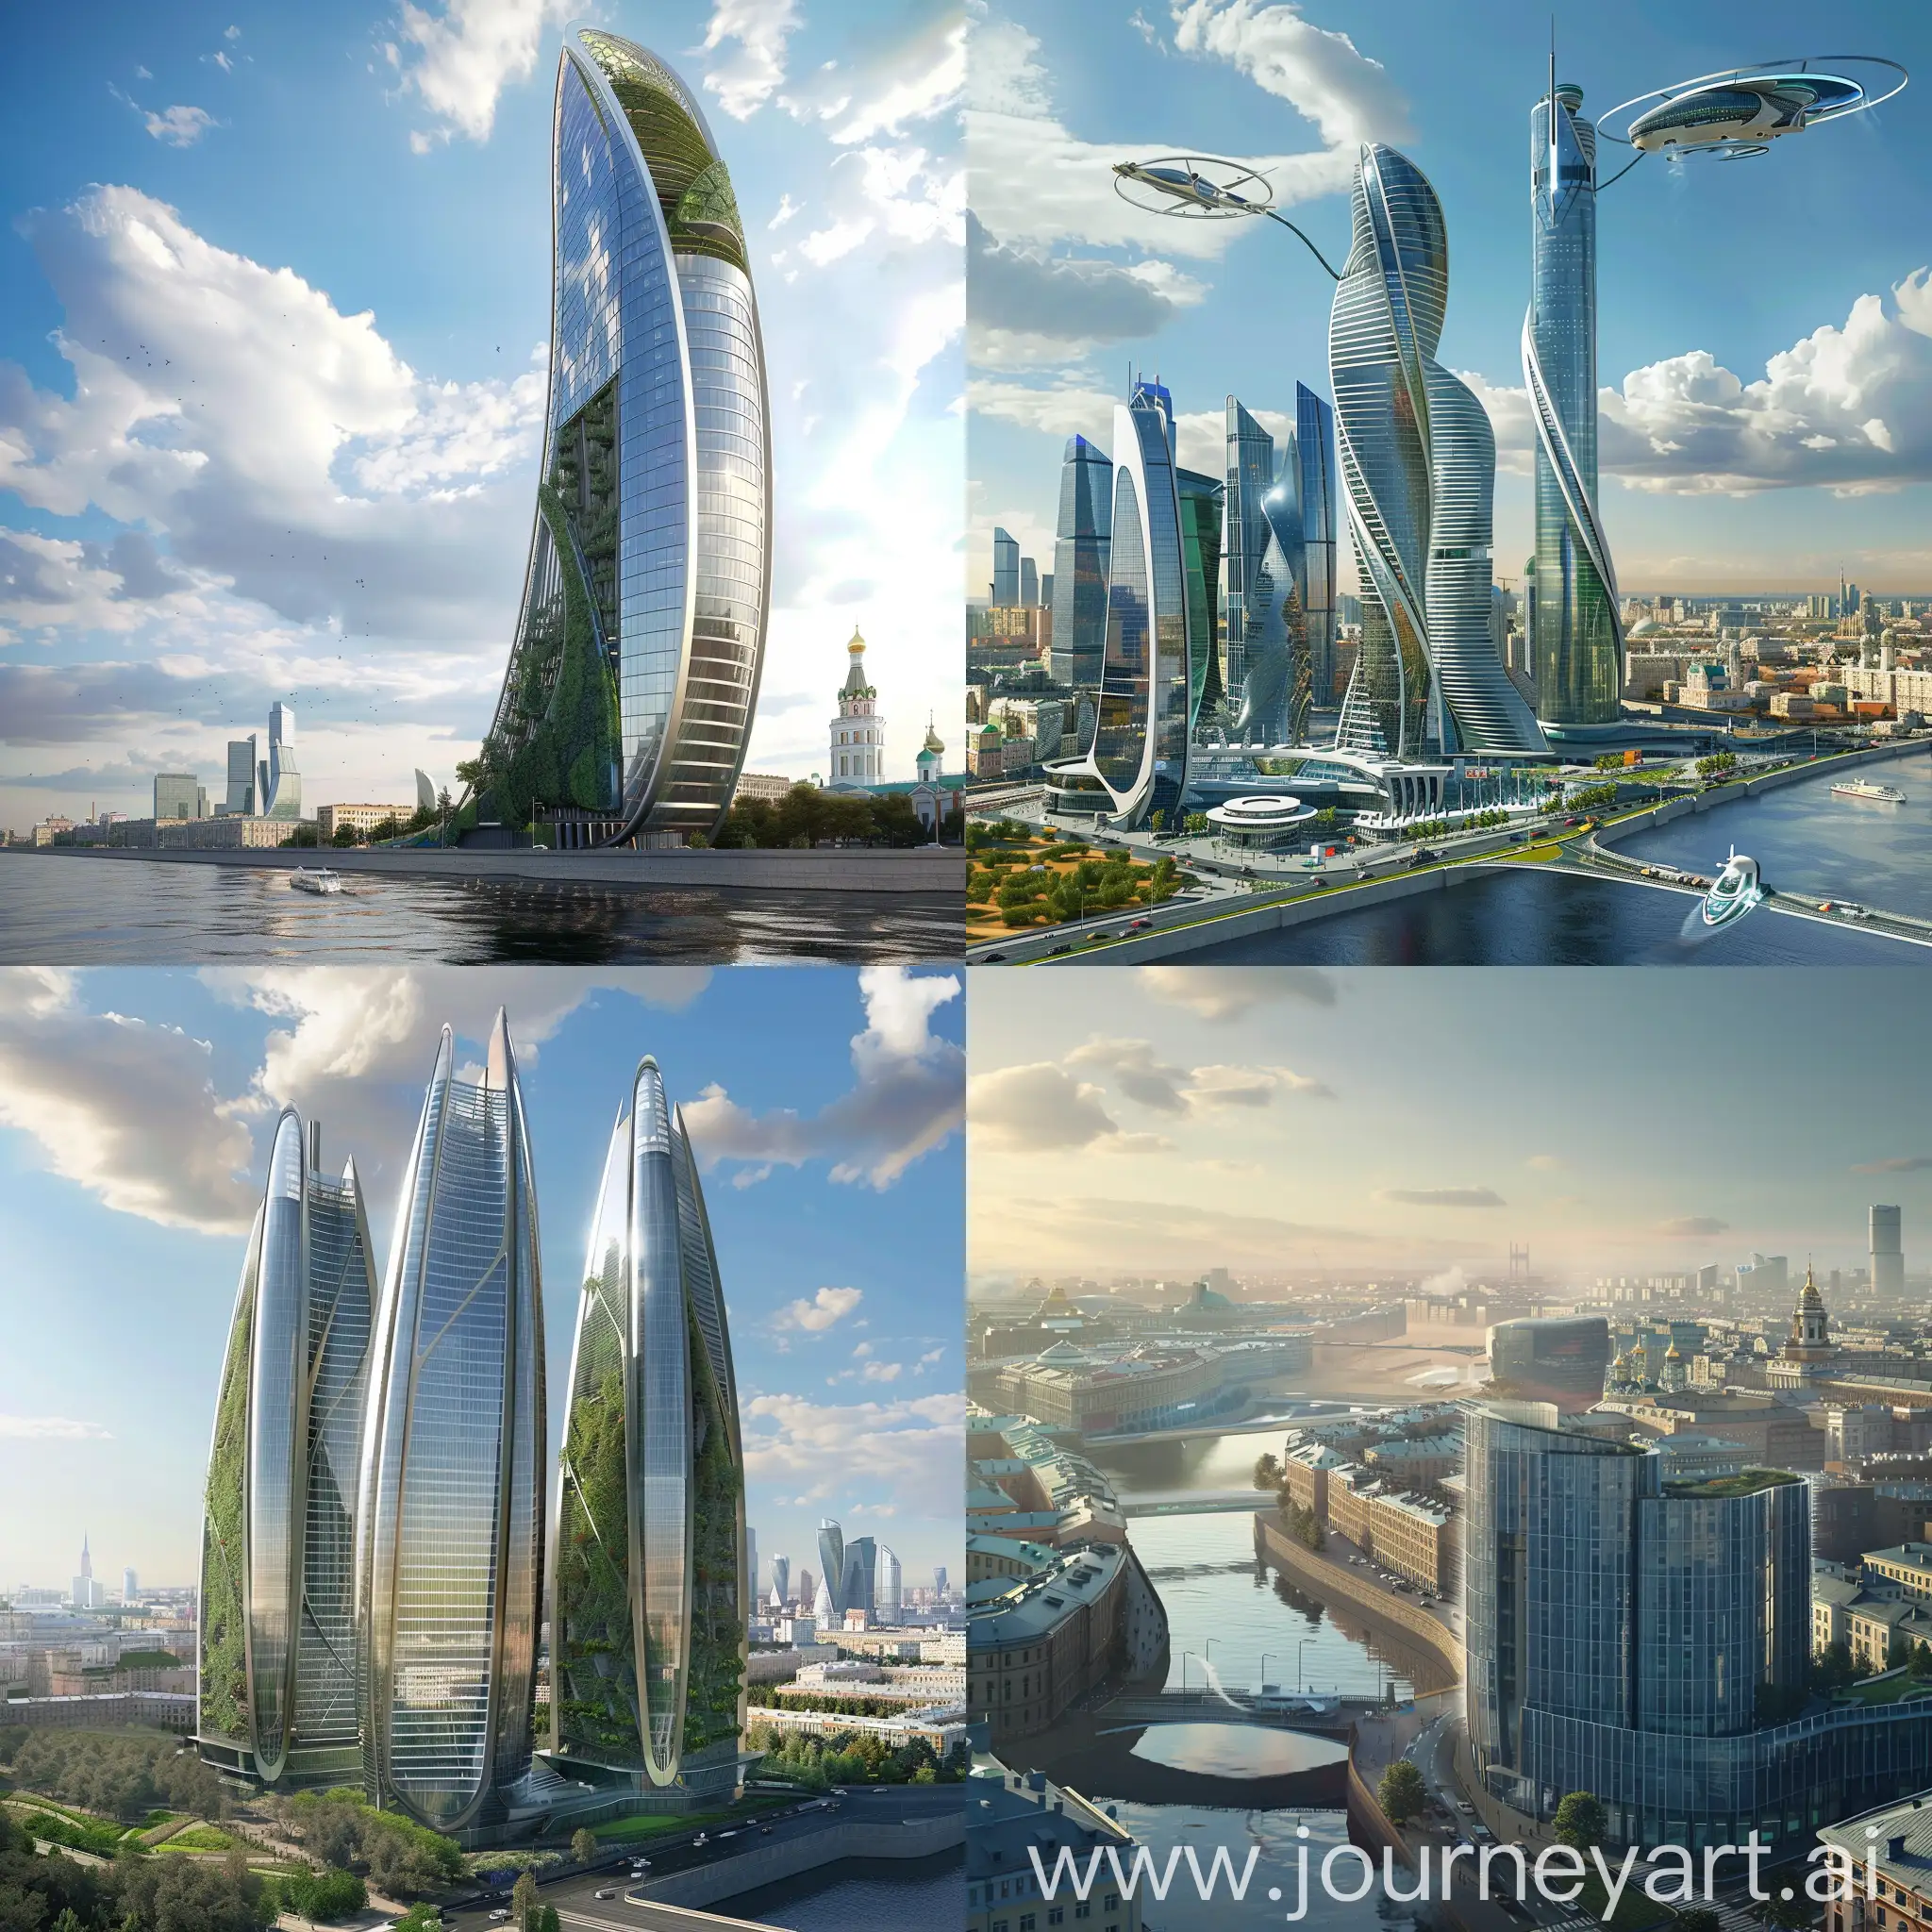 Futuristic Saint Petersburg, Kinetic Facades, Vertical Gardens, Helipads, Smart Homes, Transparent Aluminum Walls, Modular Furniture, Biometric Security Systems, 3D-Printed Interiors, Ubiquitous Computing, Augmented Reality Features, Aerodynamic Skyscrapers, Vertical Cities, Glass and Metal Facades, Integrated Transportation Hubs, Kinetic Roofs, Sustainable Energy Features, Interactive Public Displays, Holographic Projections, Underwater Structures, Adaptive Facades, unreal engine 5 --stylize 1000